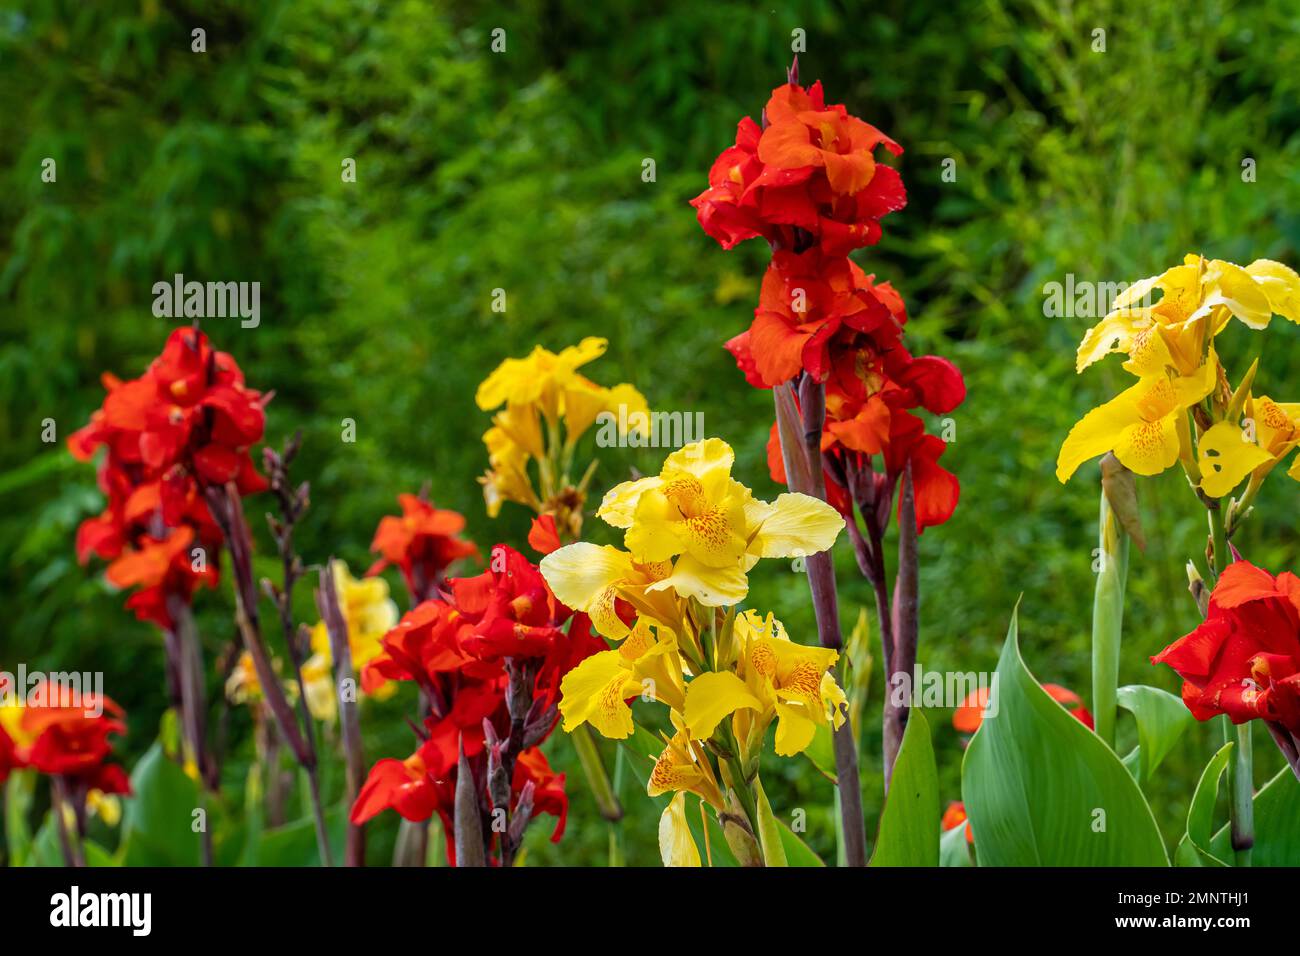 Yellow flower with red spots called Canna Yellow King Humbert and red flower called Red Velvet cannas lily growing in the garden. Beautiful foliage an Stock Photo